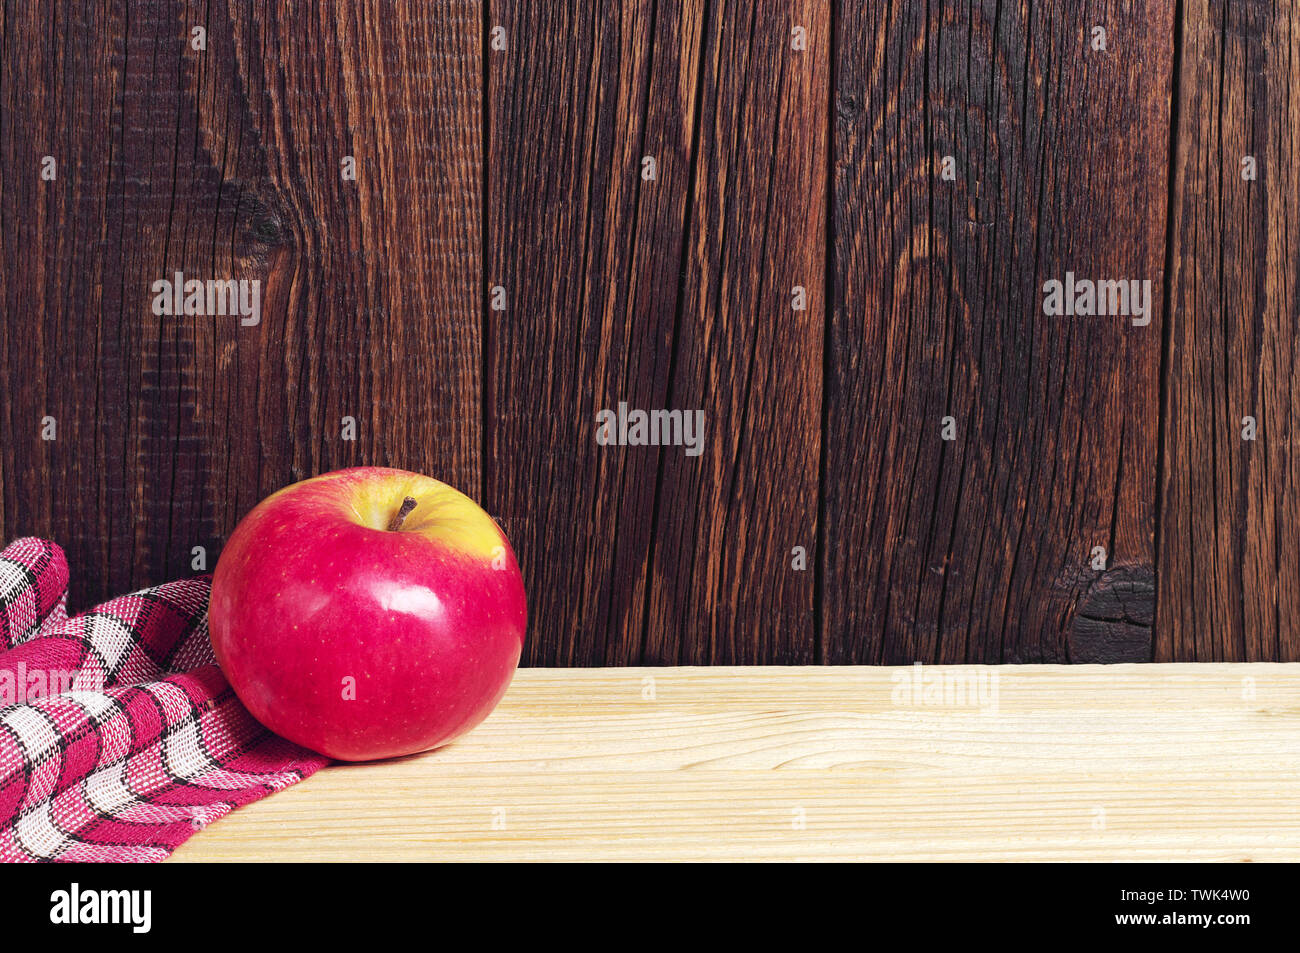 One red apple on wooden table Stock Photo